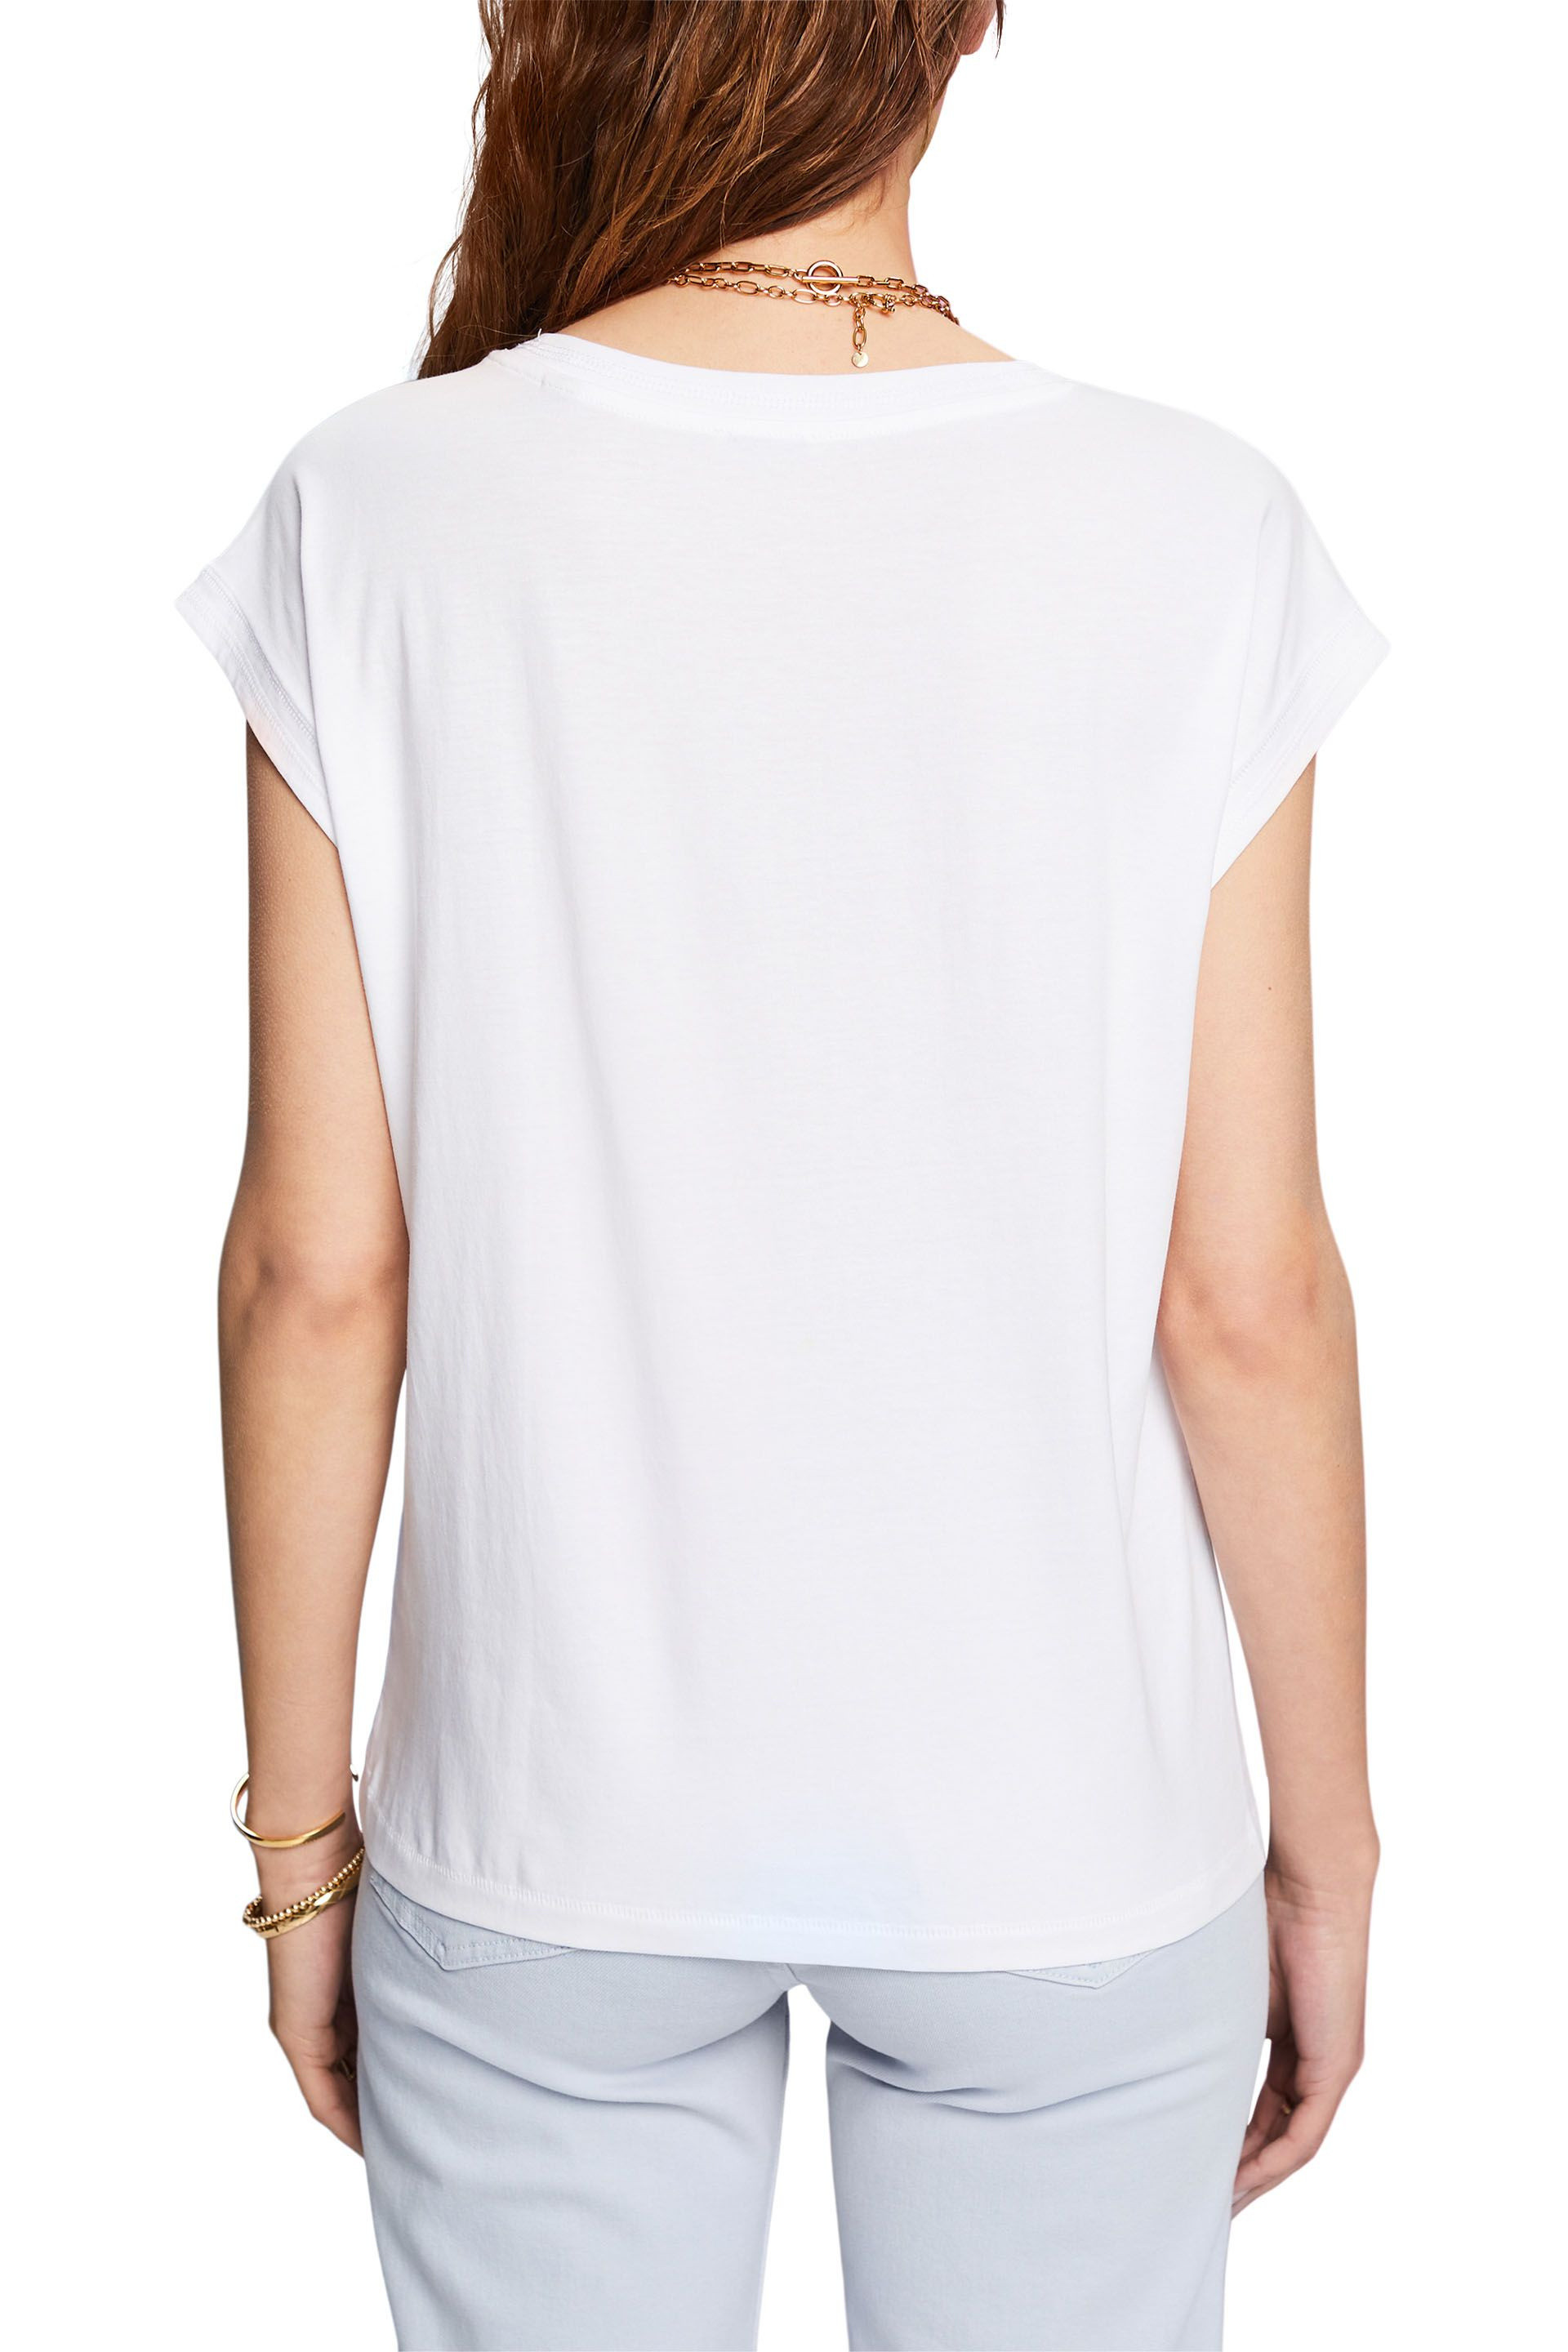 Esprit - Cotton T-shirt with print, White, large image number 2